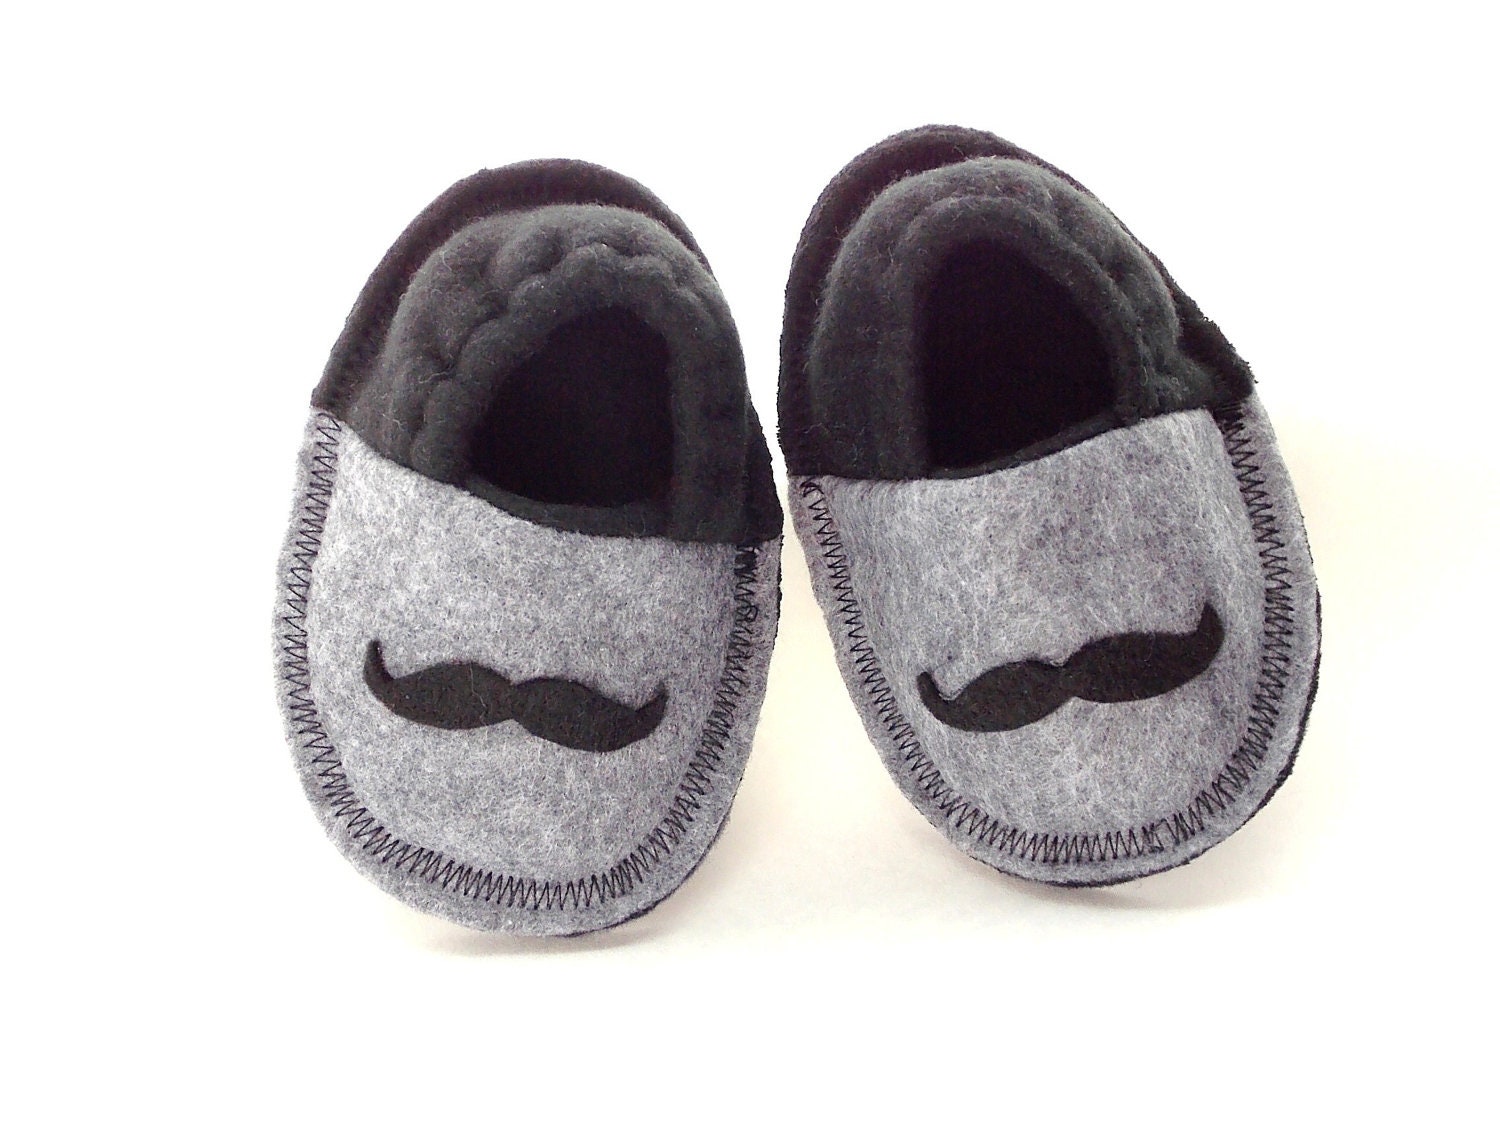 Infant Crib Shoes Baby Mustache Slippers Baby Shoes Fleece Booties Soft Felt Soles Gray Black 0-3 3-6 Months - MoJosCozyToes